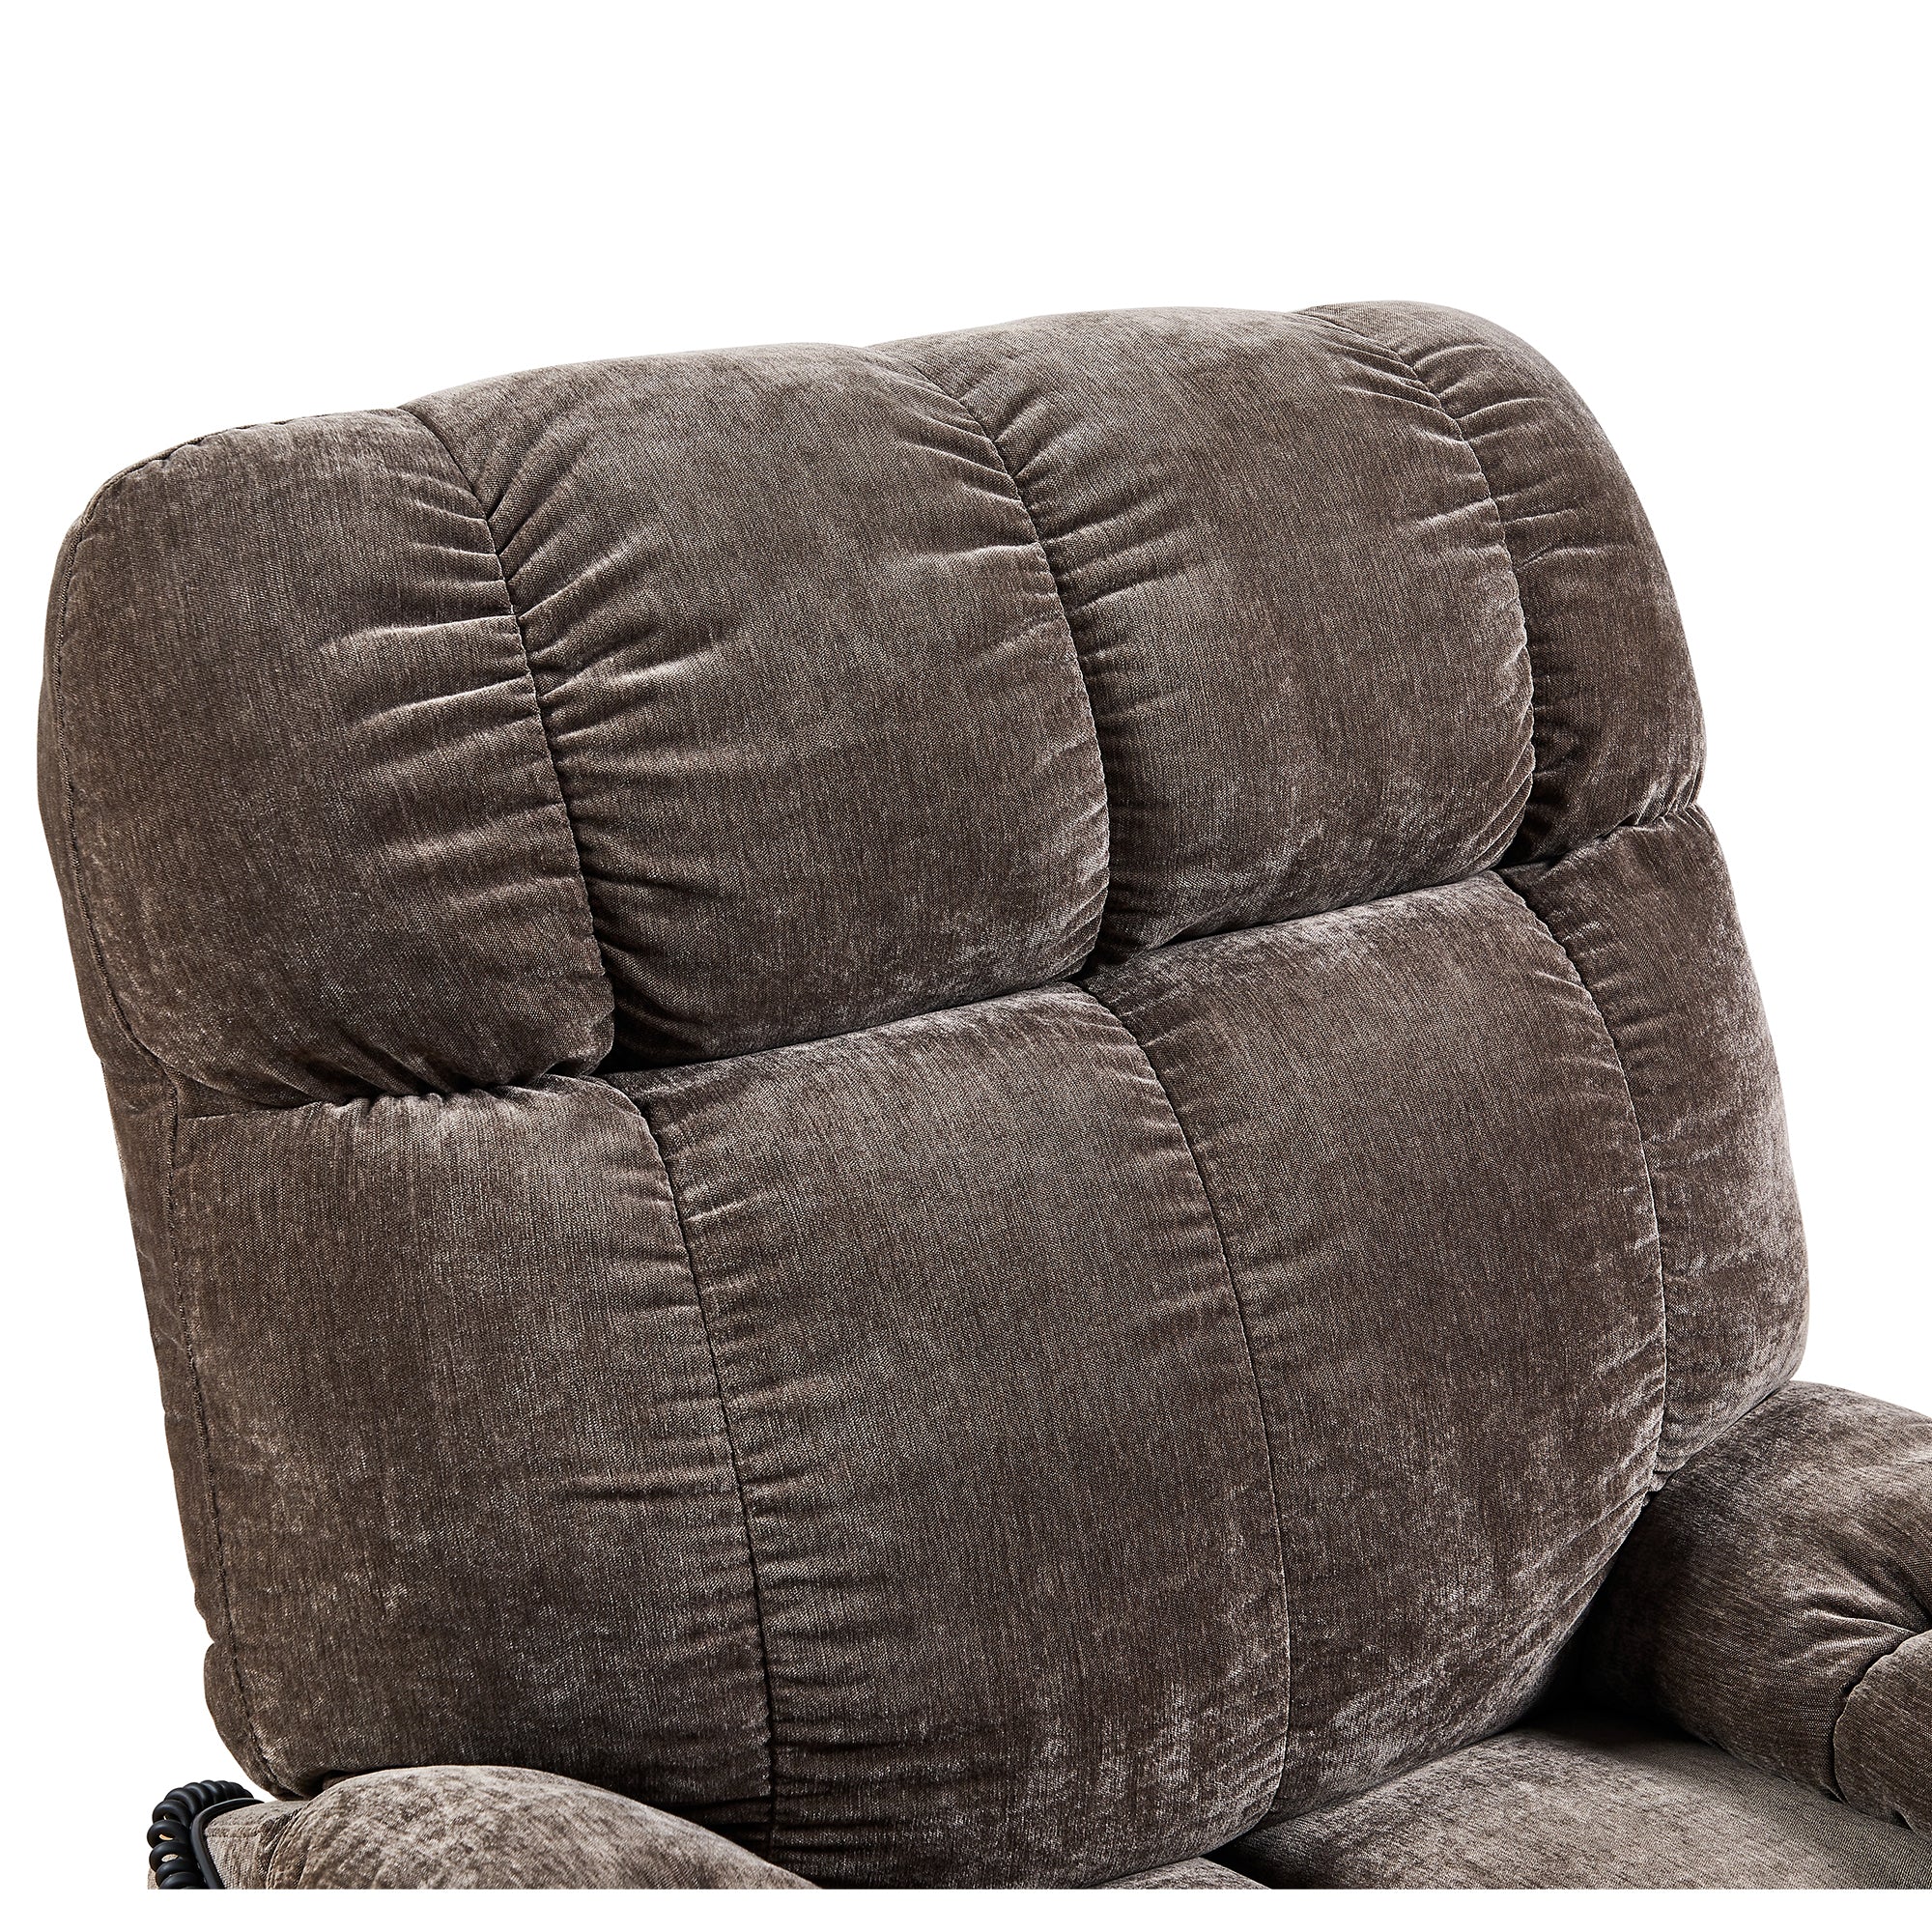 Infinite Position Sleep and Lift Recliner with Heat Massage, Brown